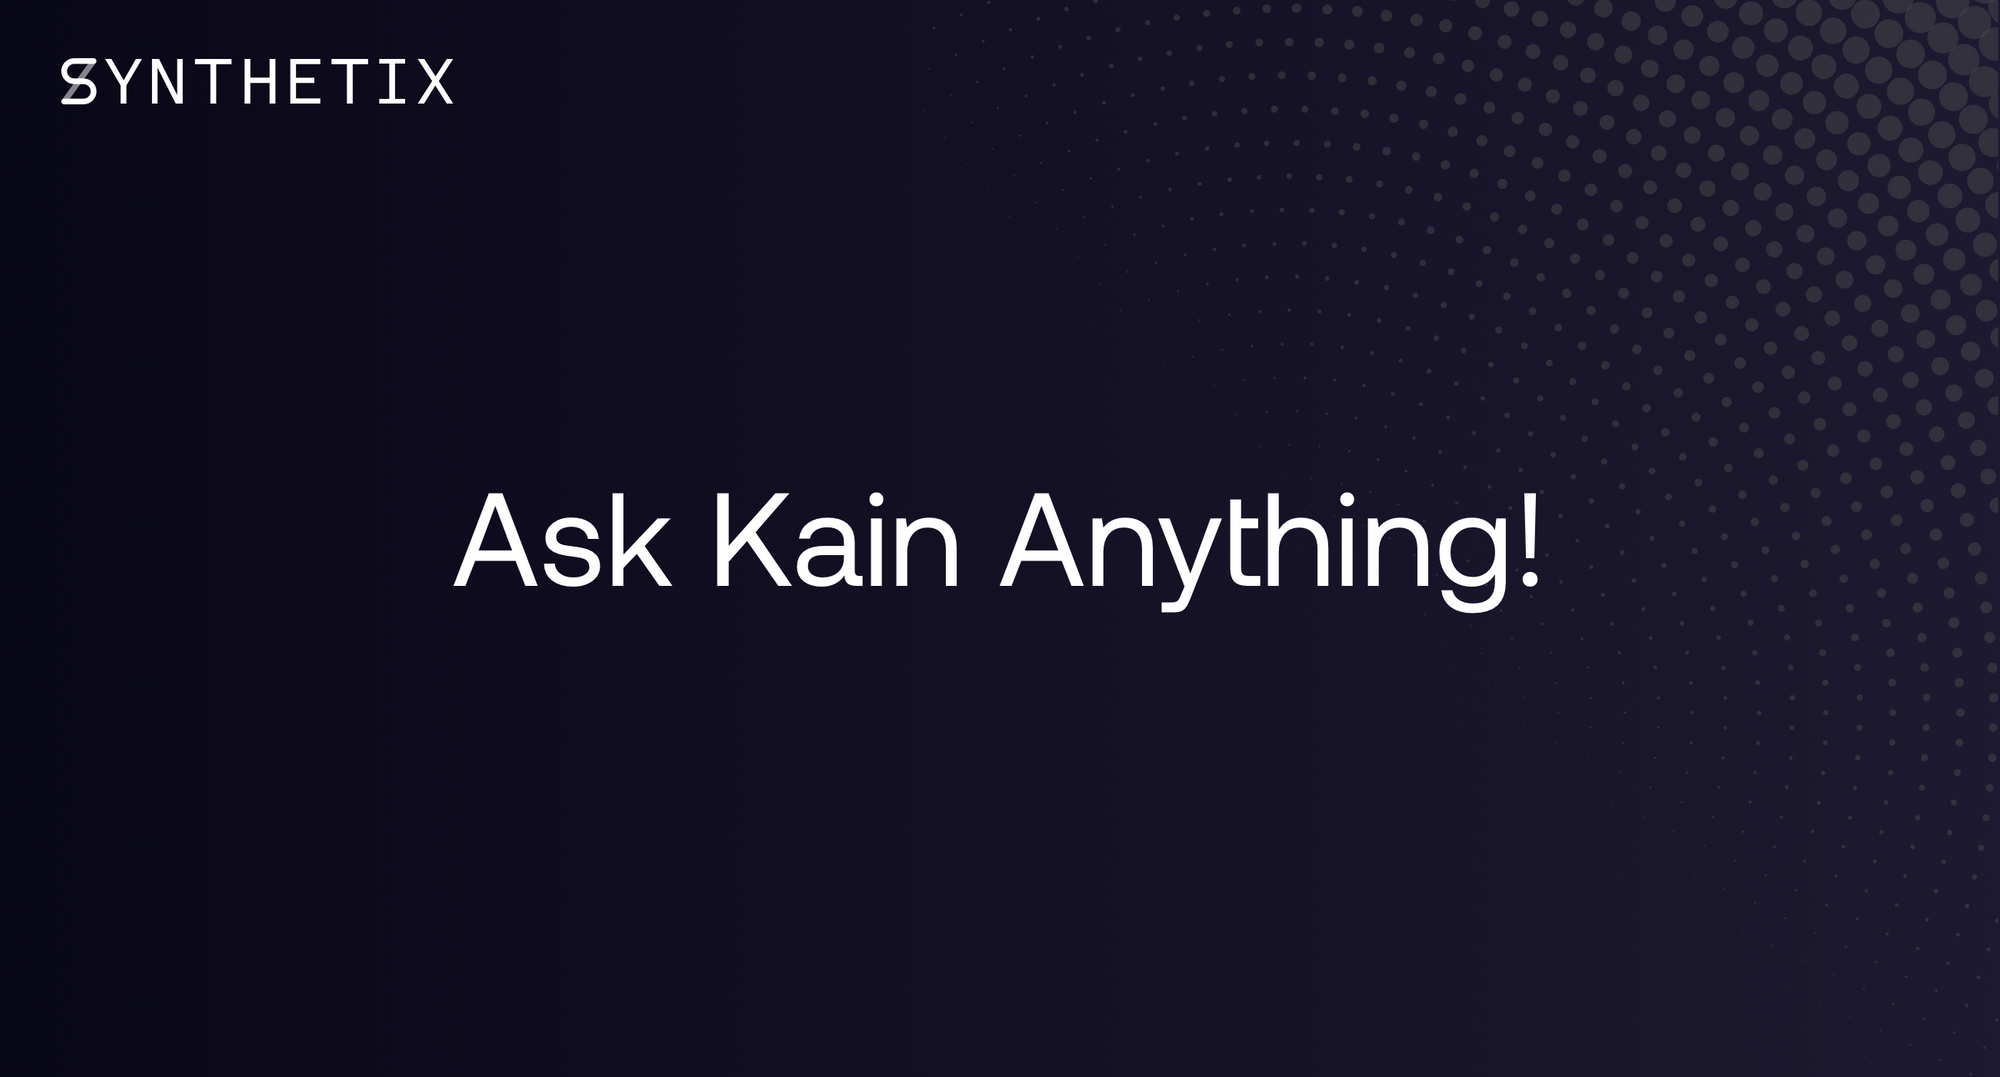 Join Kain in a Reddit AMA tomorrow!